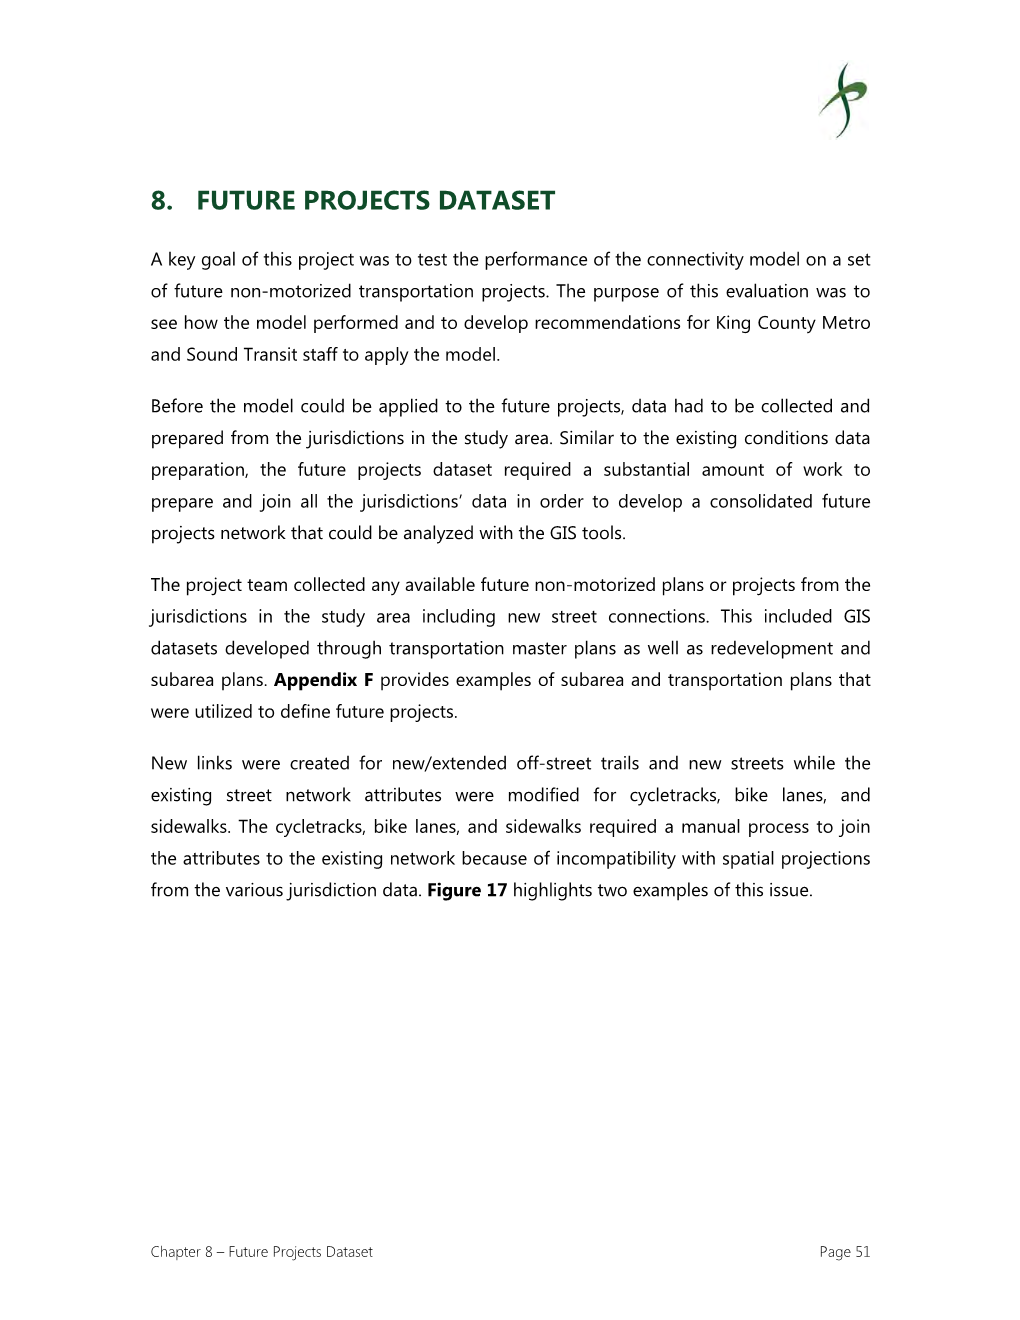 8. Future Projects Dataset